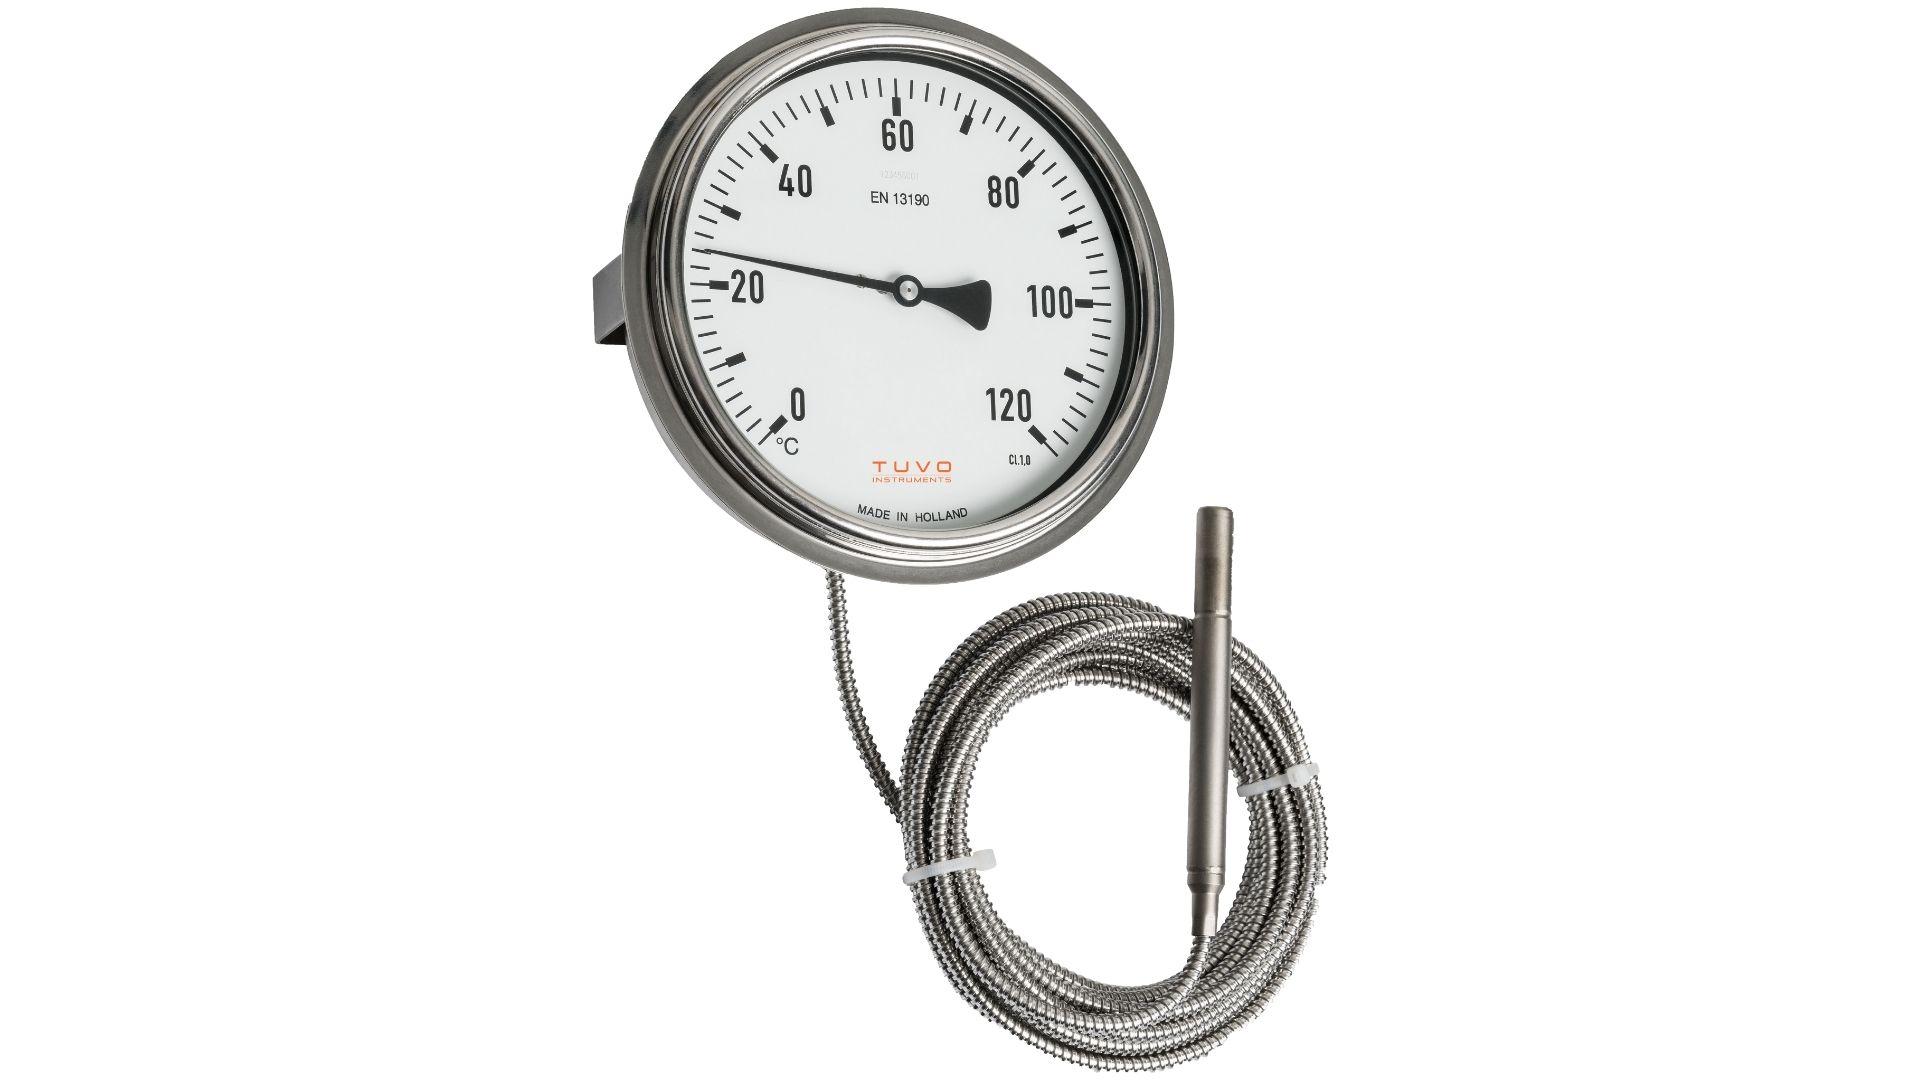 https://tuvo-instruments.com/wp-content/uploads/2022/01/thermometer-with-capillary-and-u-clamp-for-flush-panel-mounting-jpg.jpg